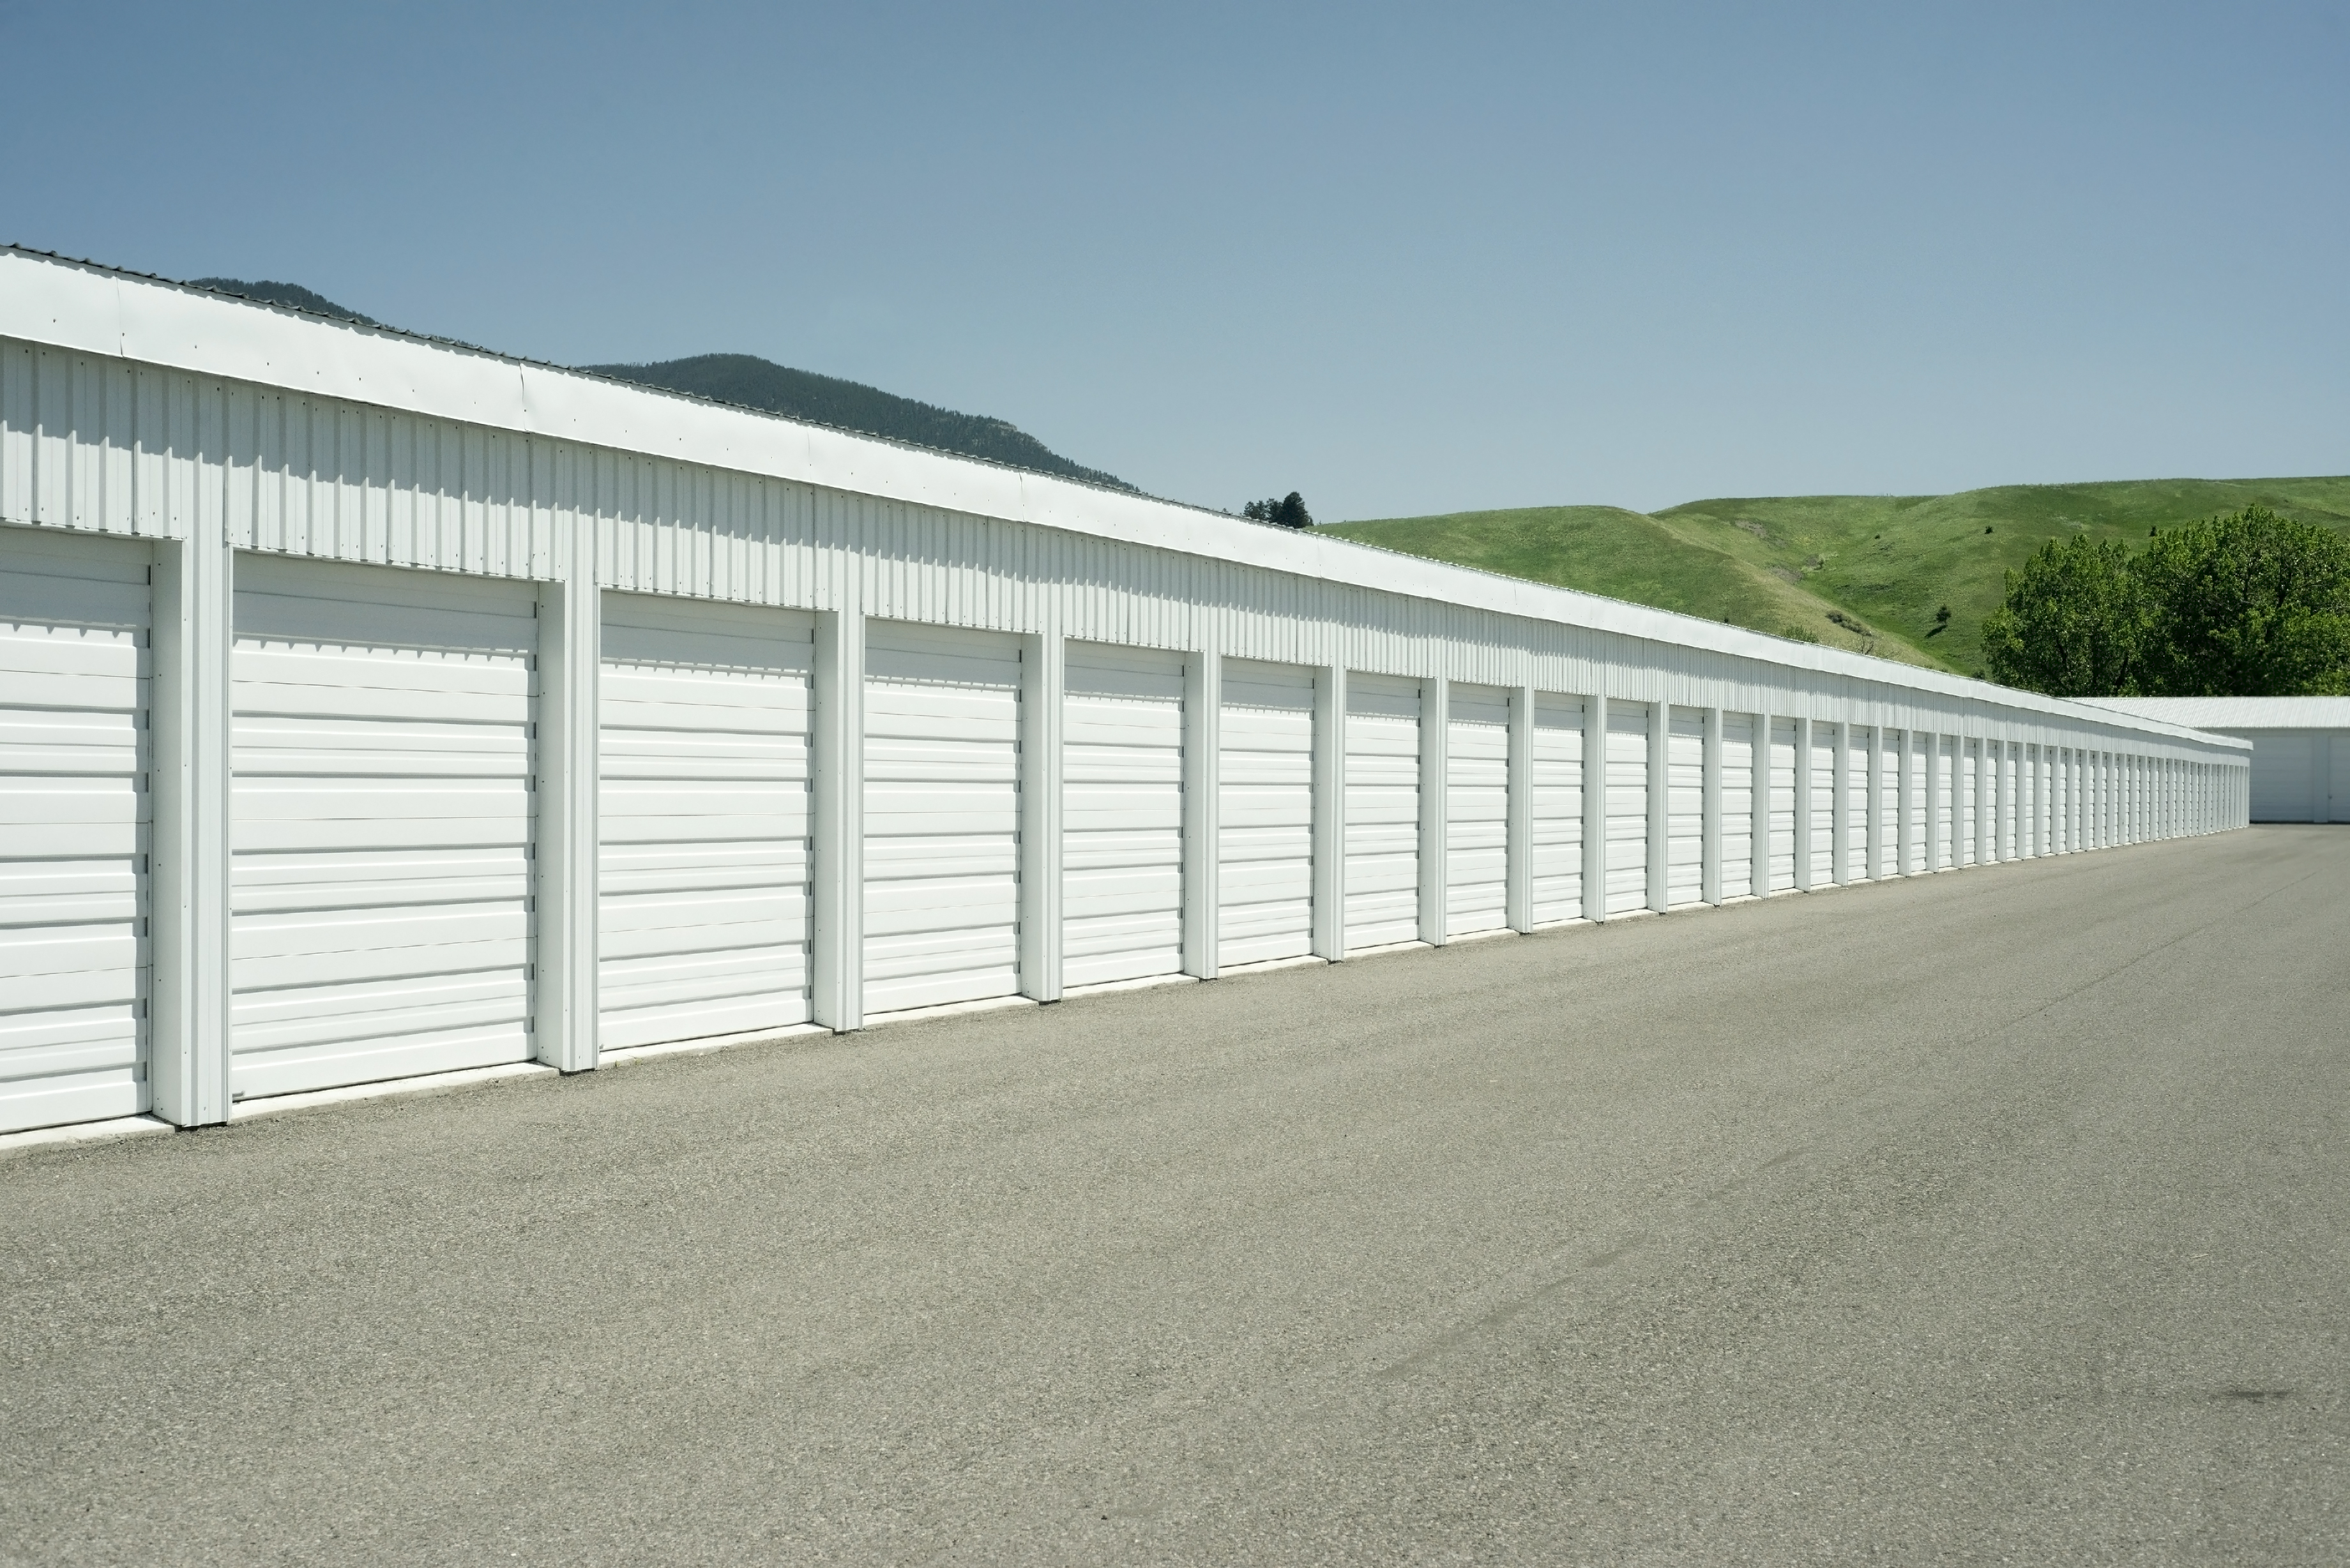 What Kind Of Self Storage Units Yakima WA Qualities Are You Looking For?